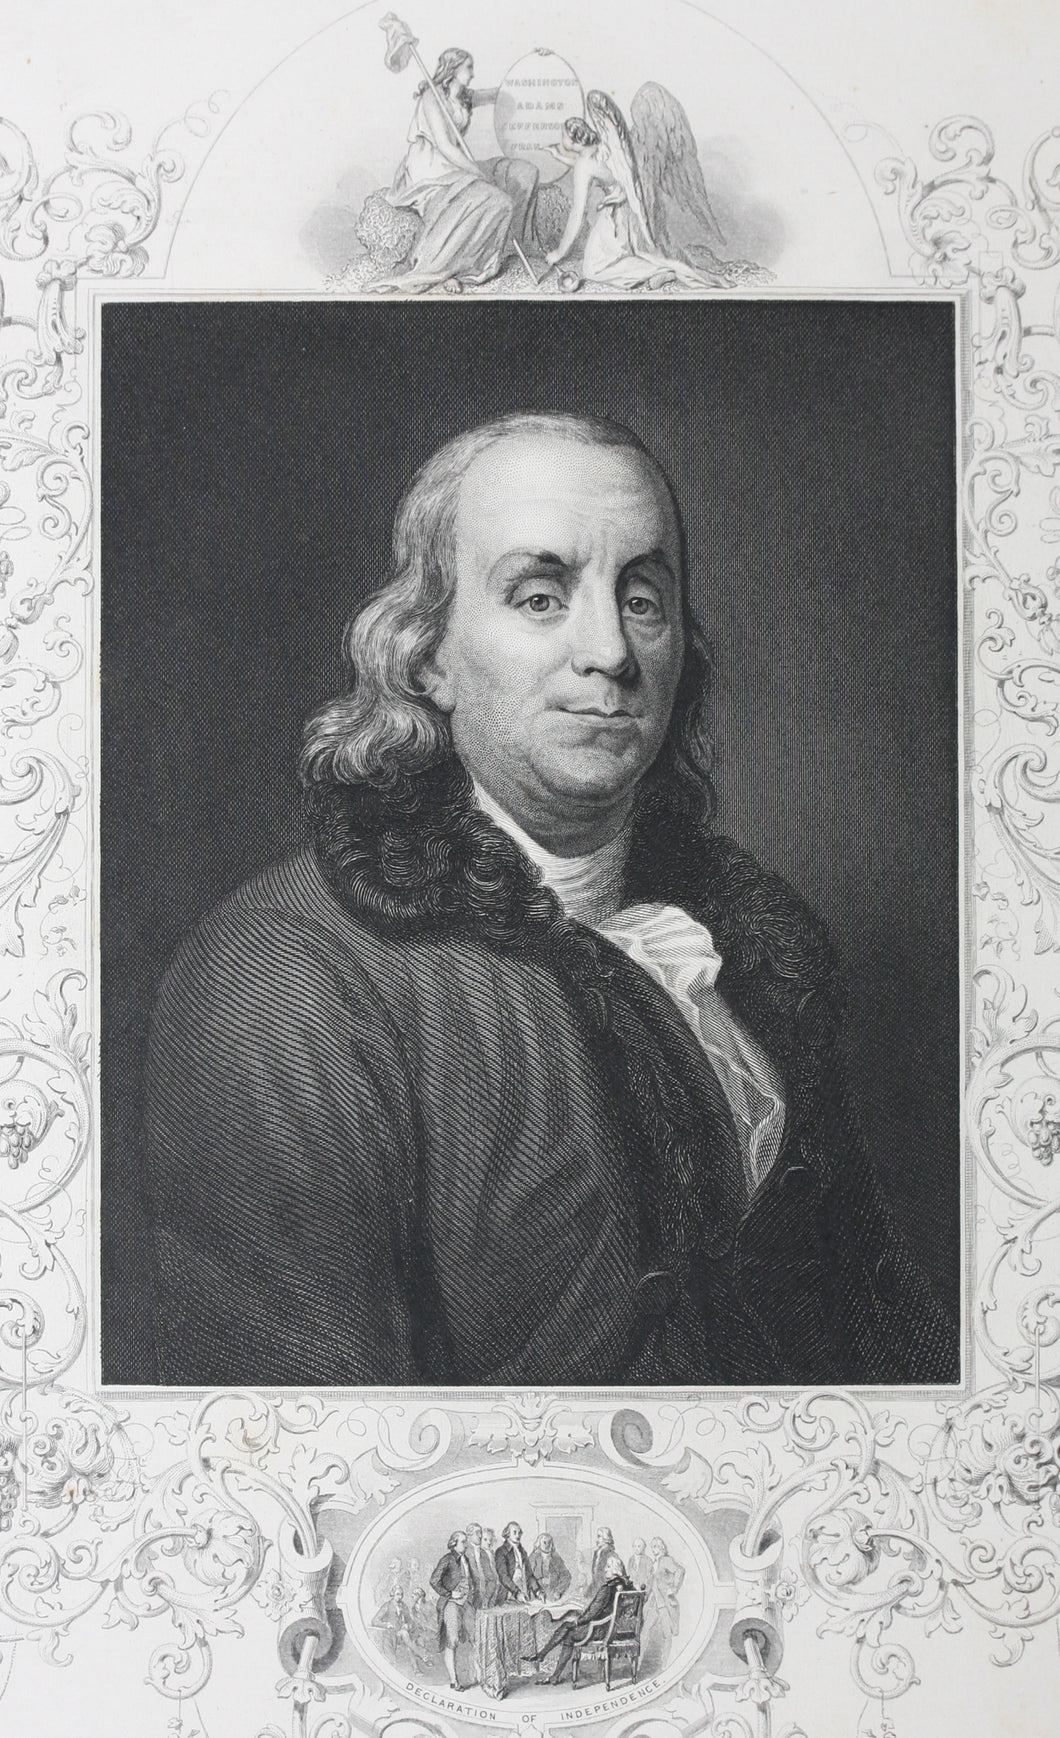 Joseph Siffred Duplessis, after. John Trumbull (vignette), after. Portrait of Benjamin Franklin. Engraving by W. Joseph Edwards. 1843-1864.